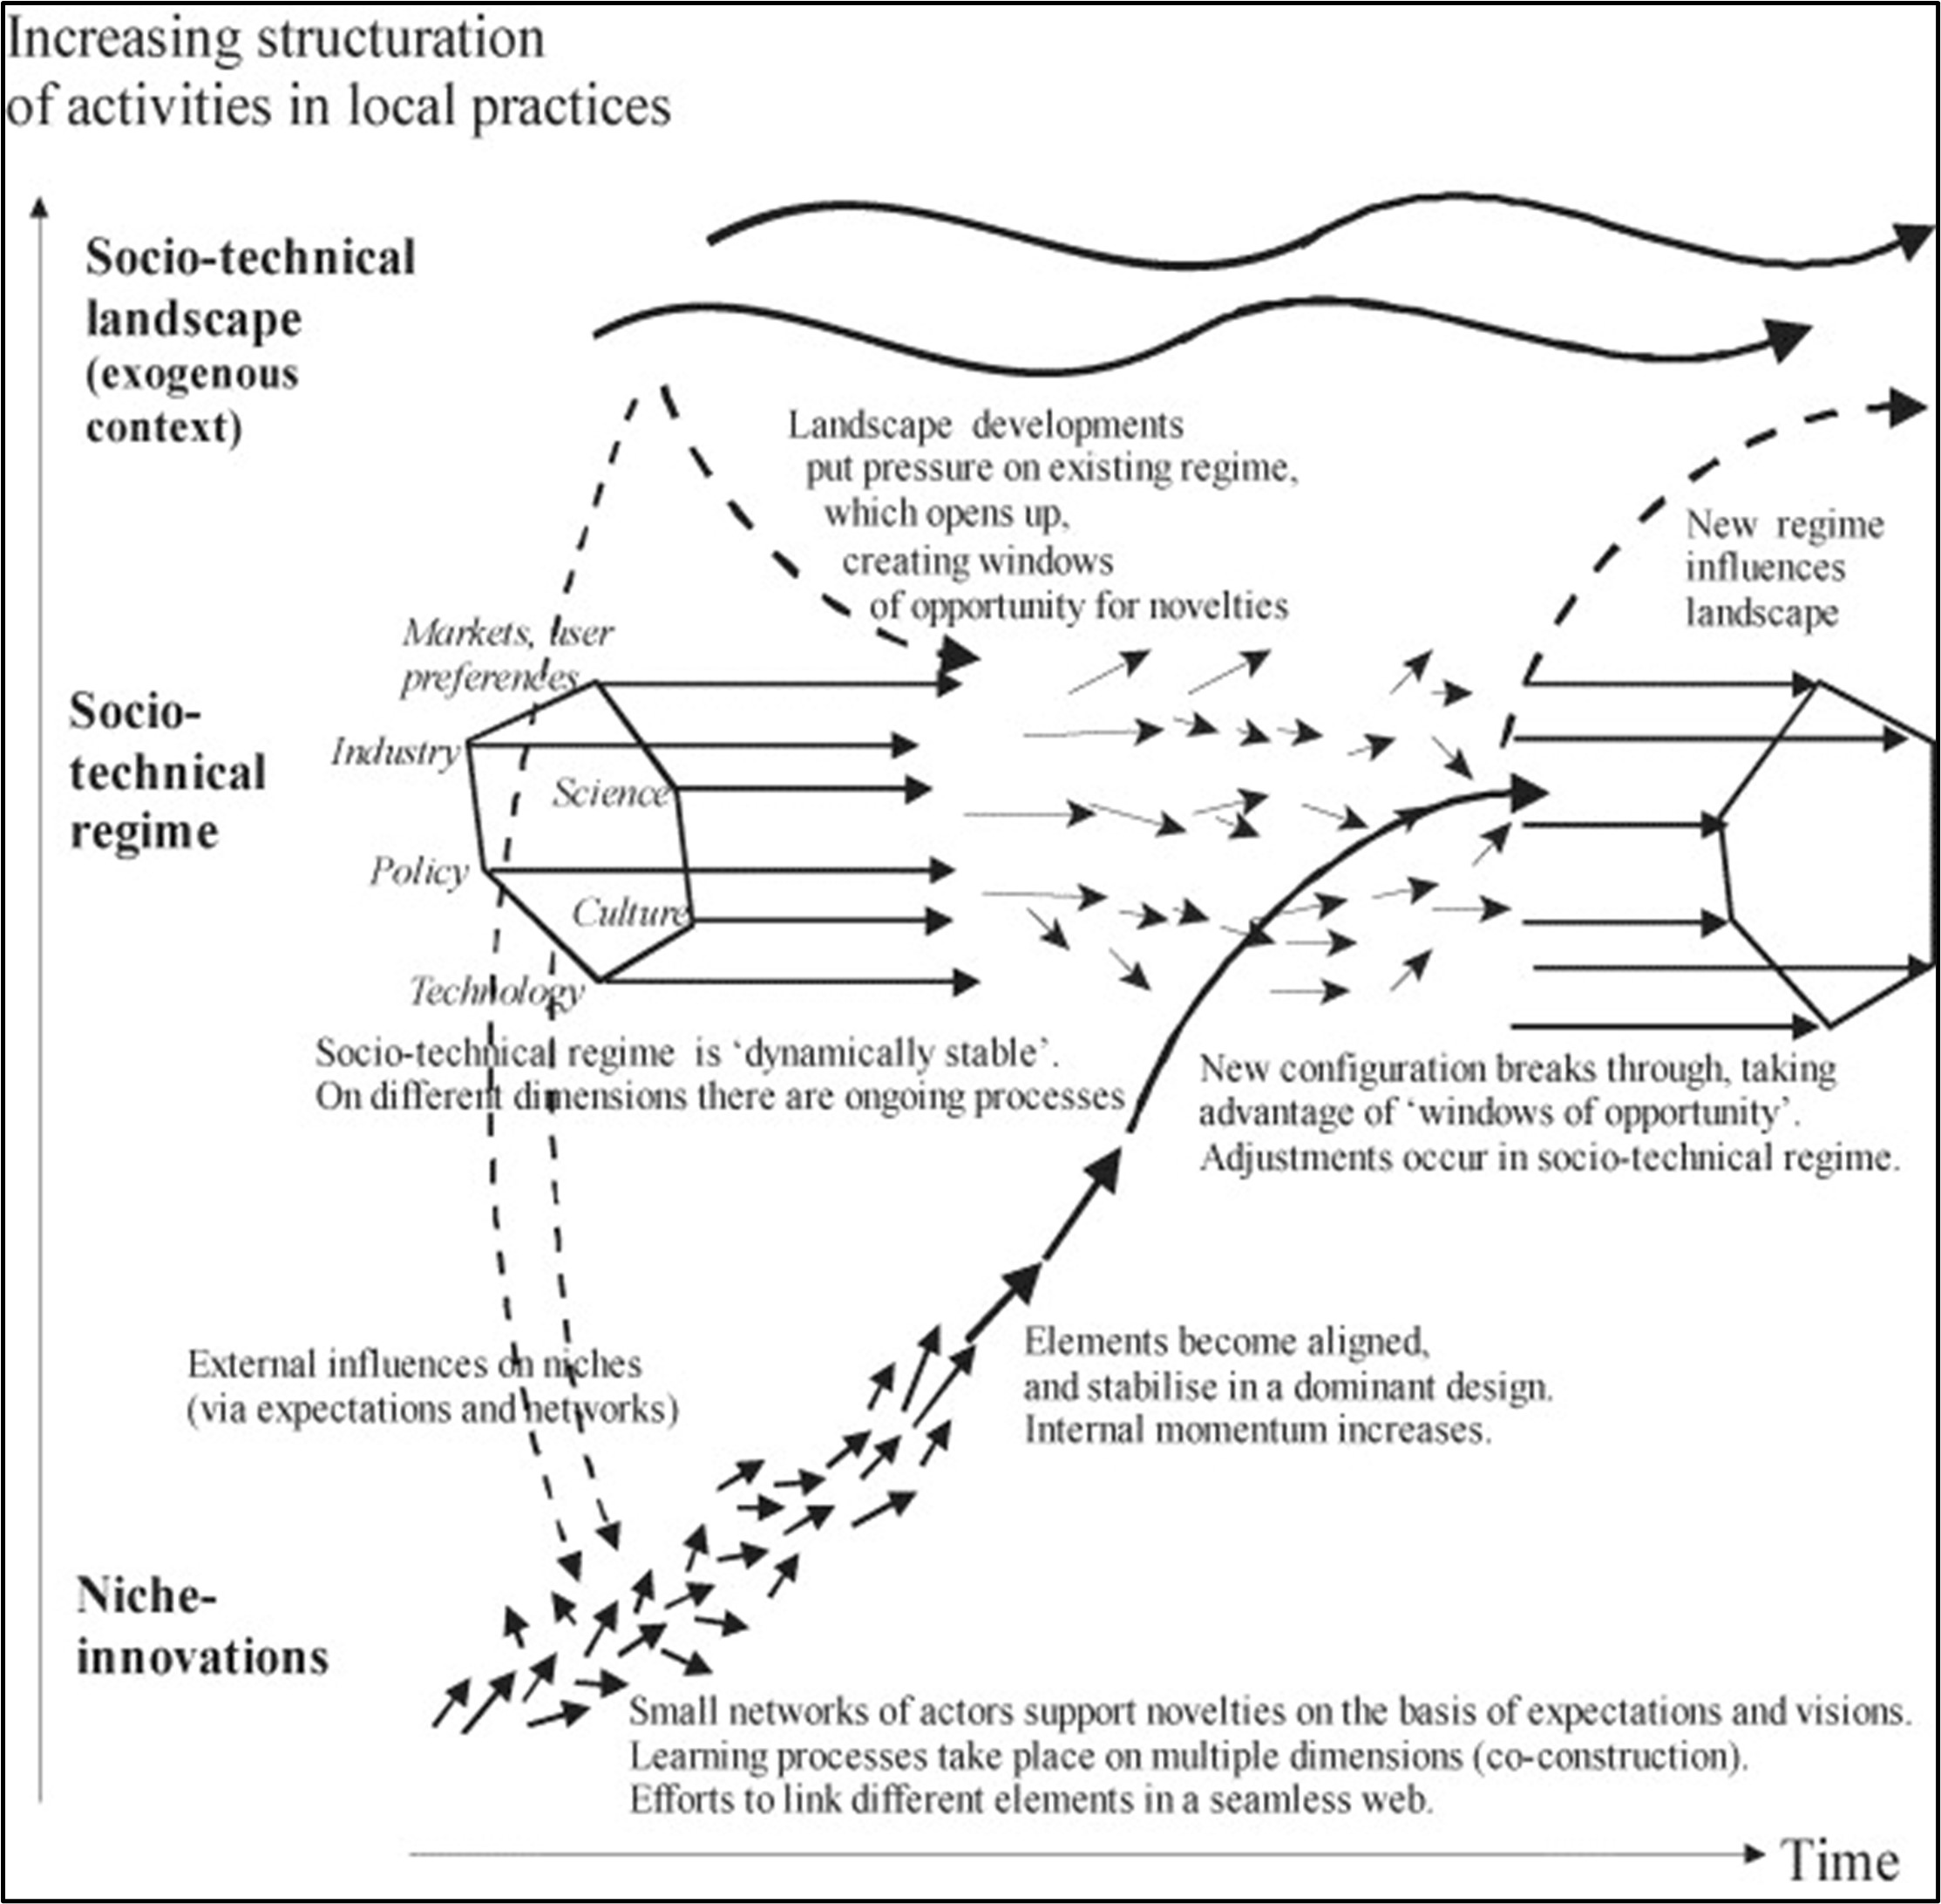 Socio technological transitions and processes. A (taken from Geels 2002) B (taken from Geels and Schot 2007).